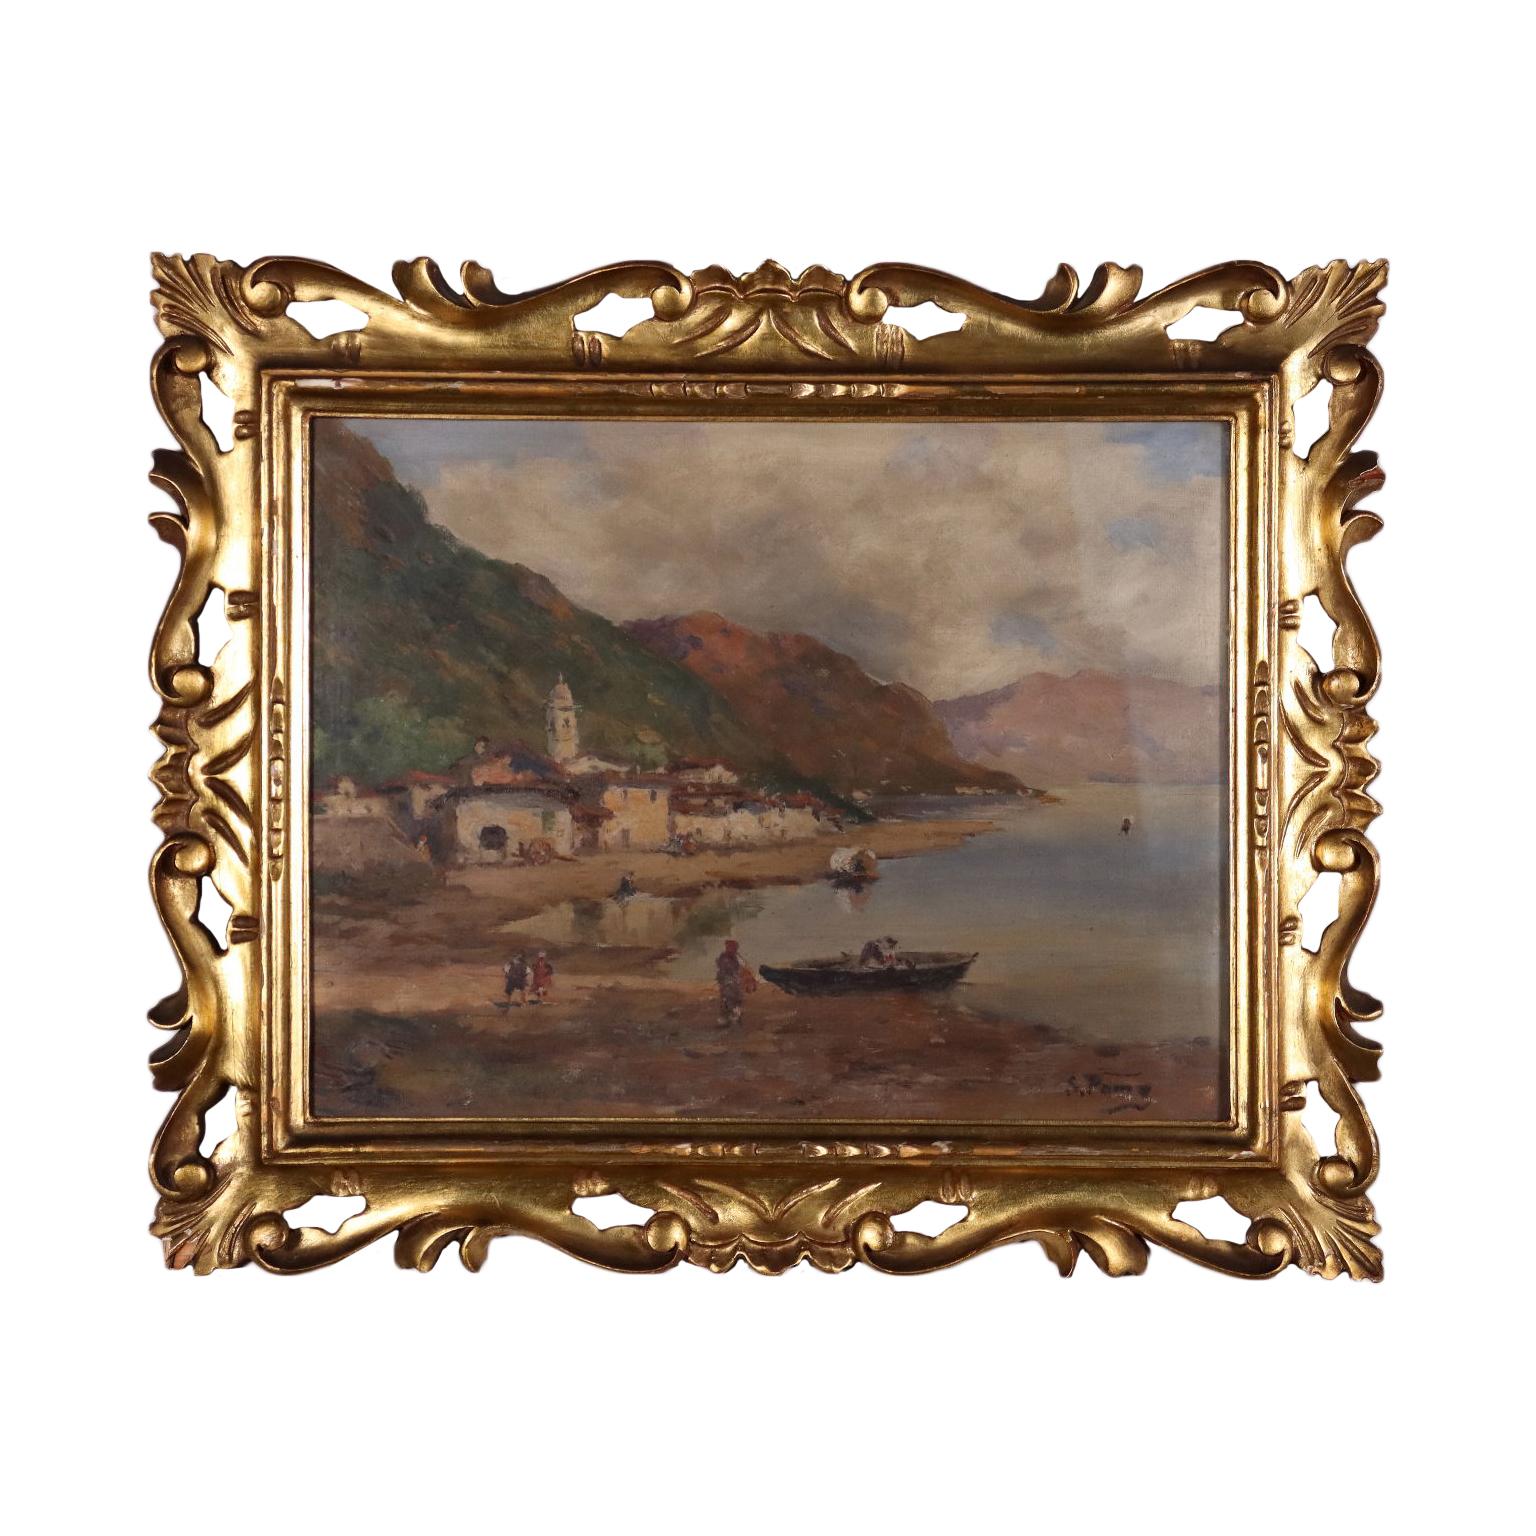 Unknown Landscape Painting - Silvio Poma Oil On Canvas Late '800 Early '900, Lake Iseo